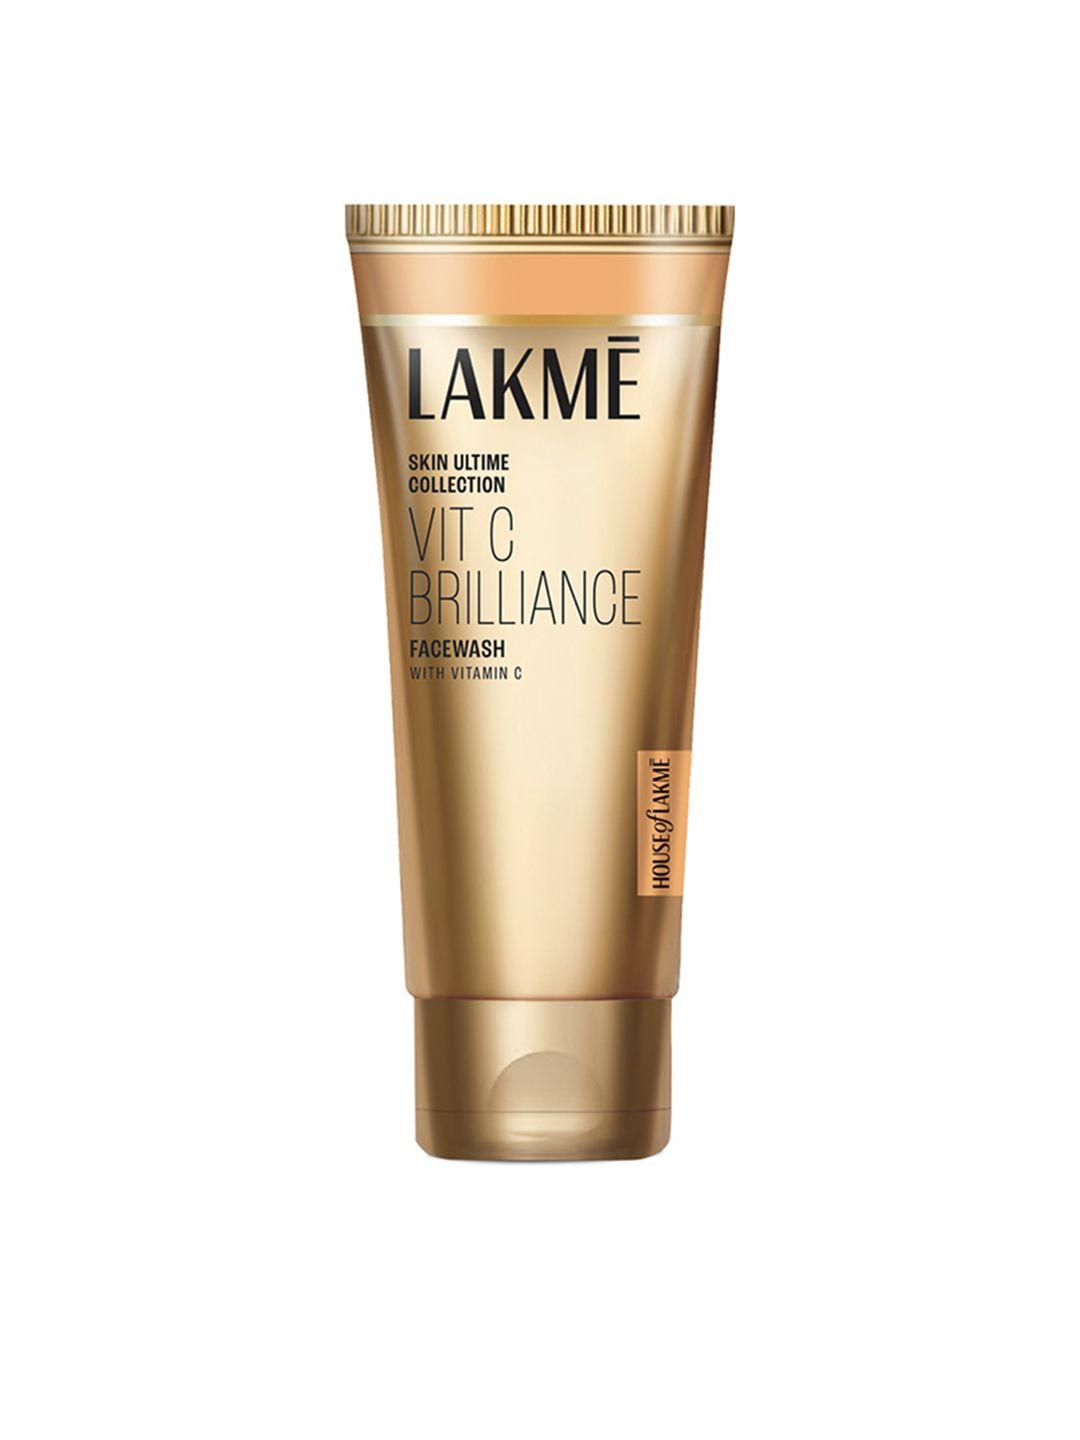 lakme 9to5 vitamin c microcrystalline beads for refreshed & glowing skin facewash 100g